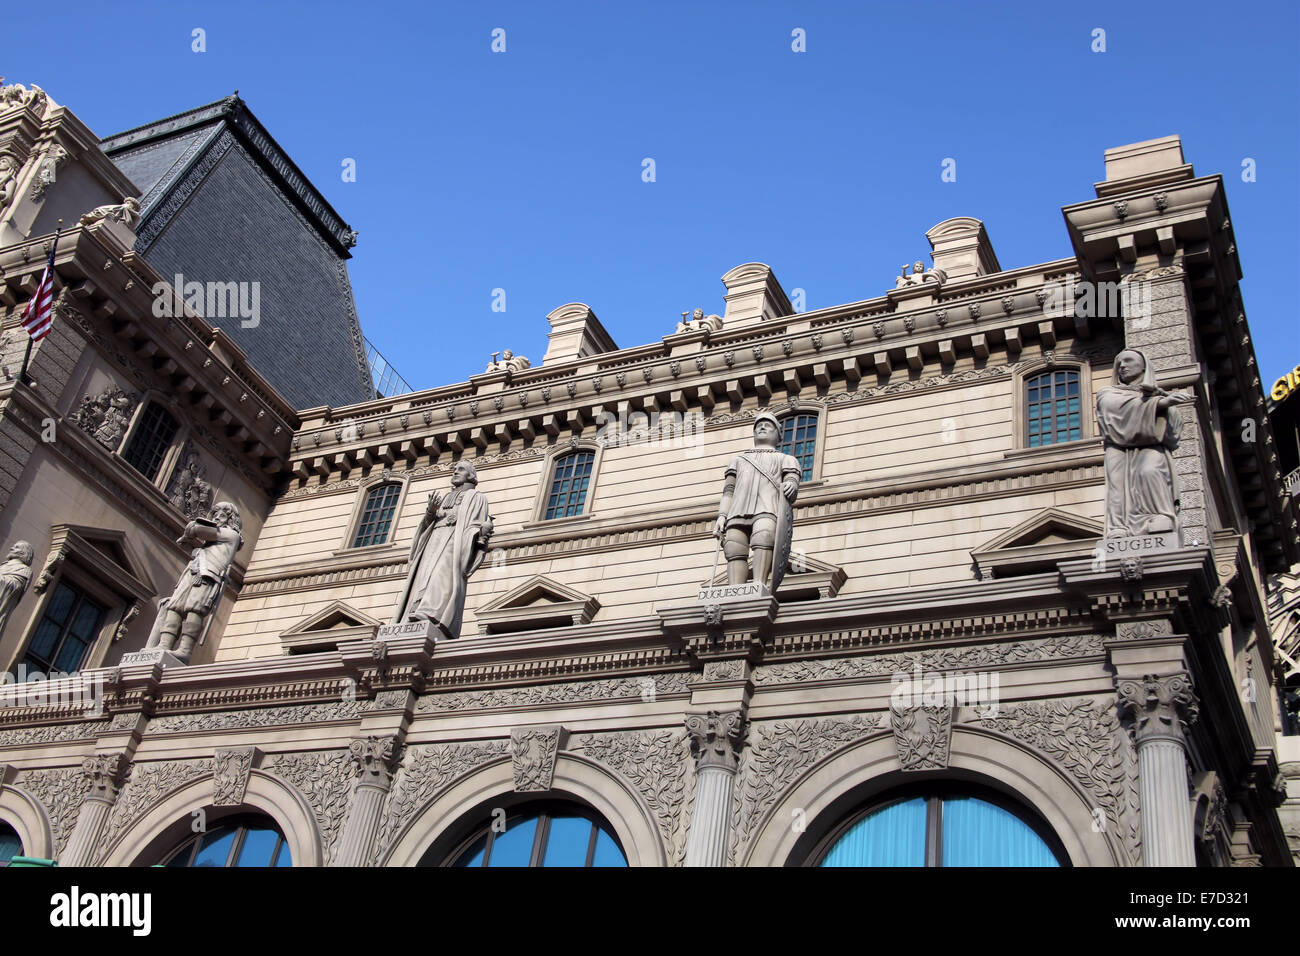 FRENCH BUILDING FARCADE WITH MONUMENTS AND STATUES Stock Photo